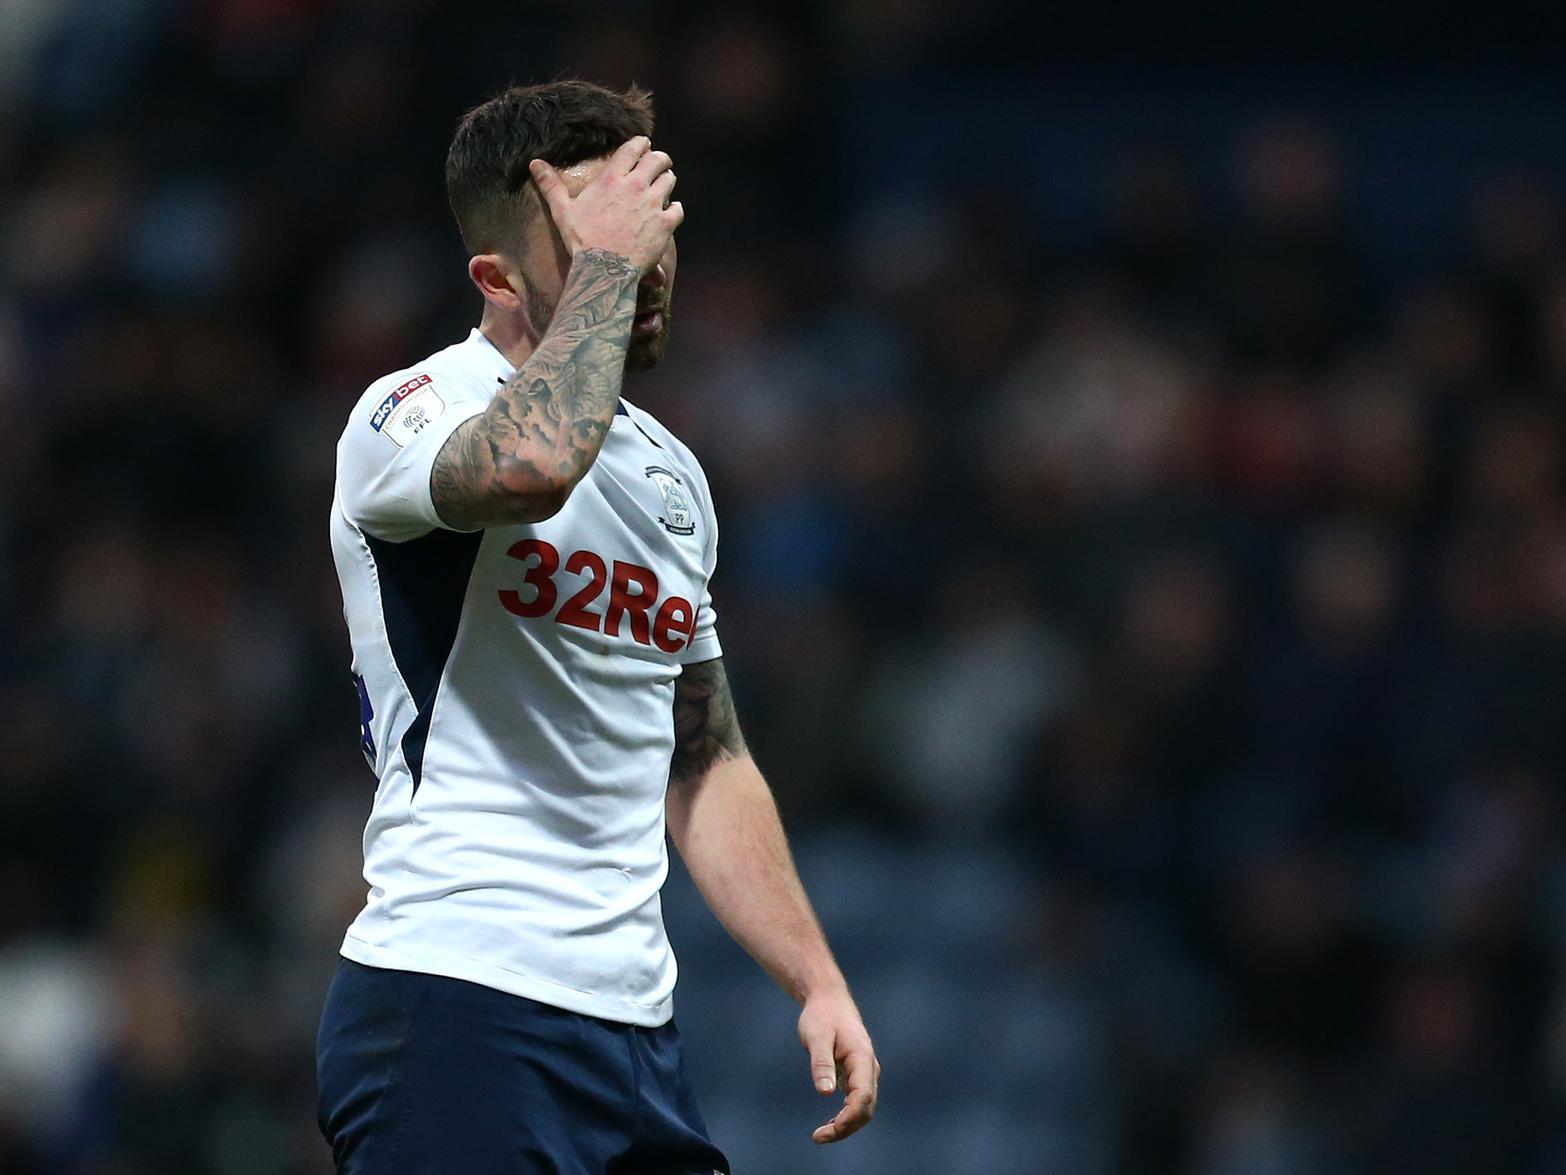 Preston's 2-0 loss to West Brom was a night to forget, especially for the Ireland international. He made just 12 accurate passes, made six wayward touches and lost the ball twice.